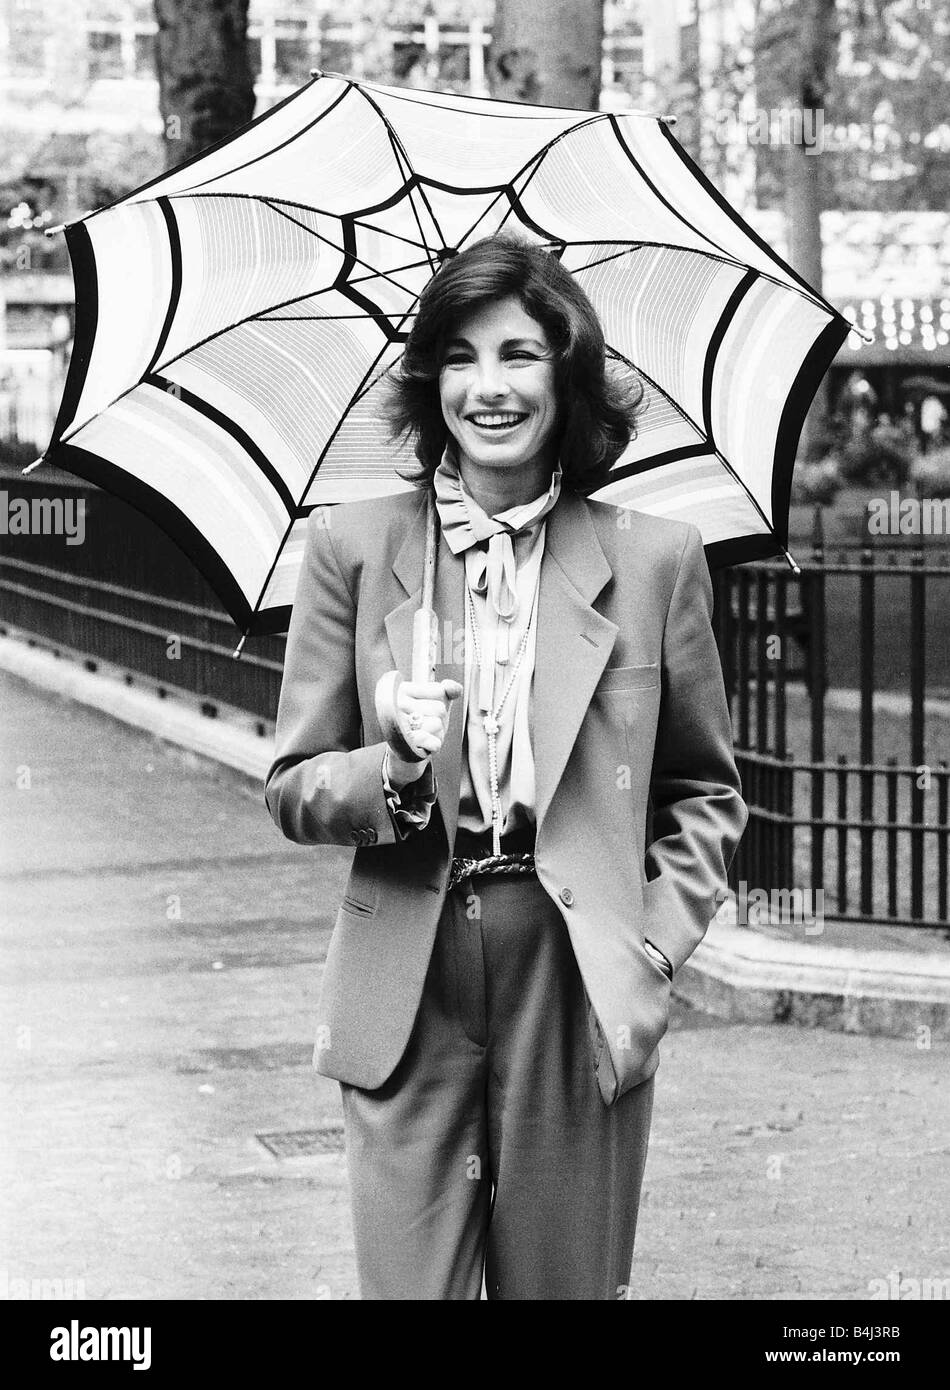 Anne Archer actress who appeared in a film called Green Ice about an attempted emerald robbery May 1981 Dbase msi Stock Photo